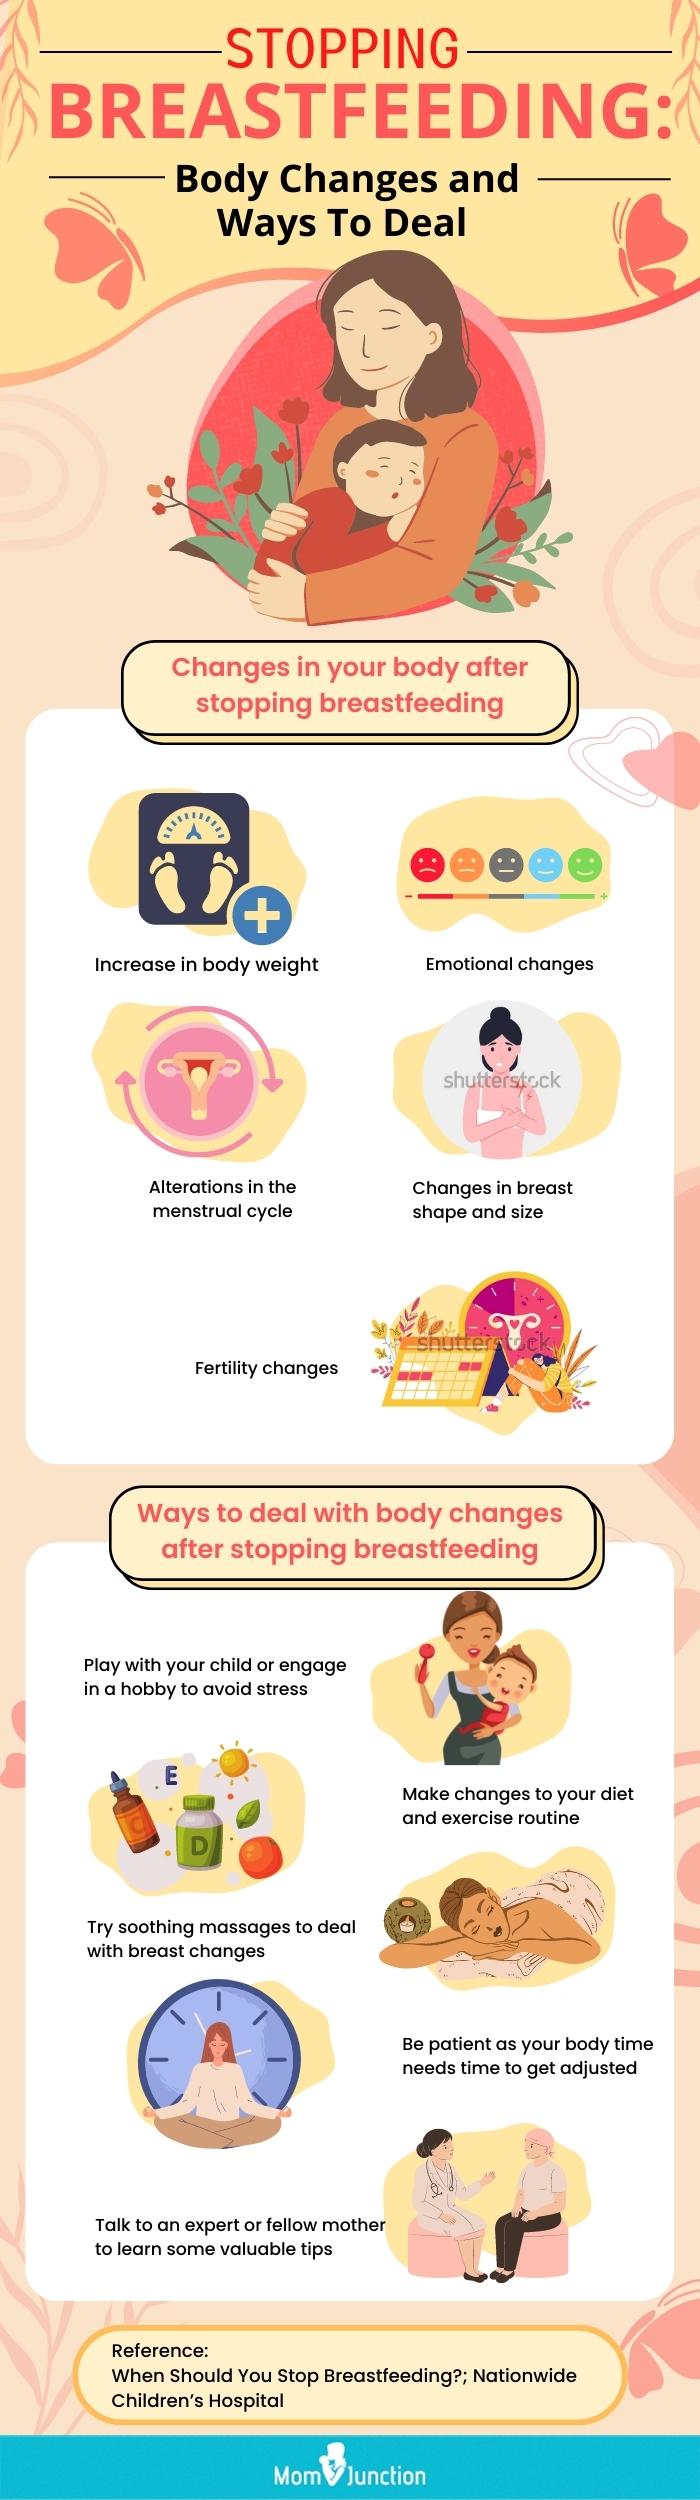 How To Stop Breastfeeding A 2-Year-Old Toddler